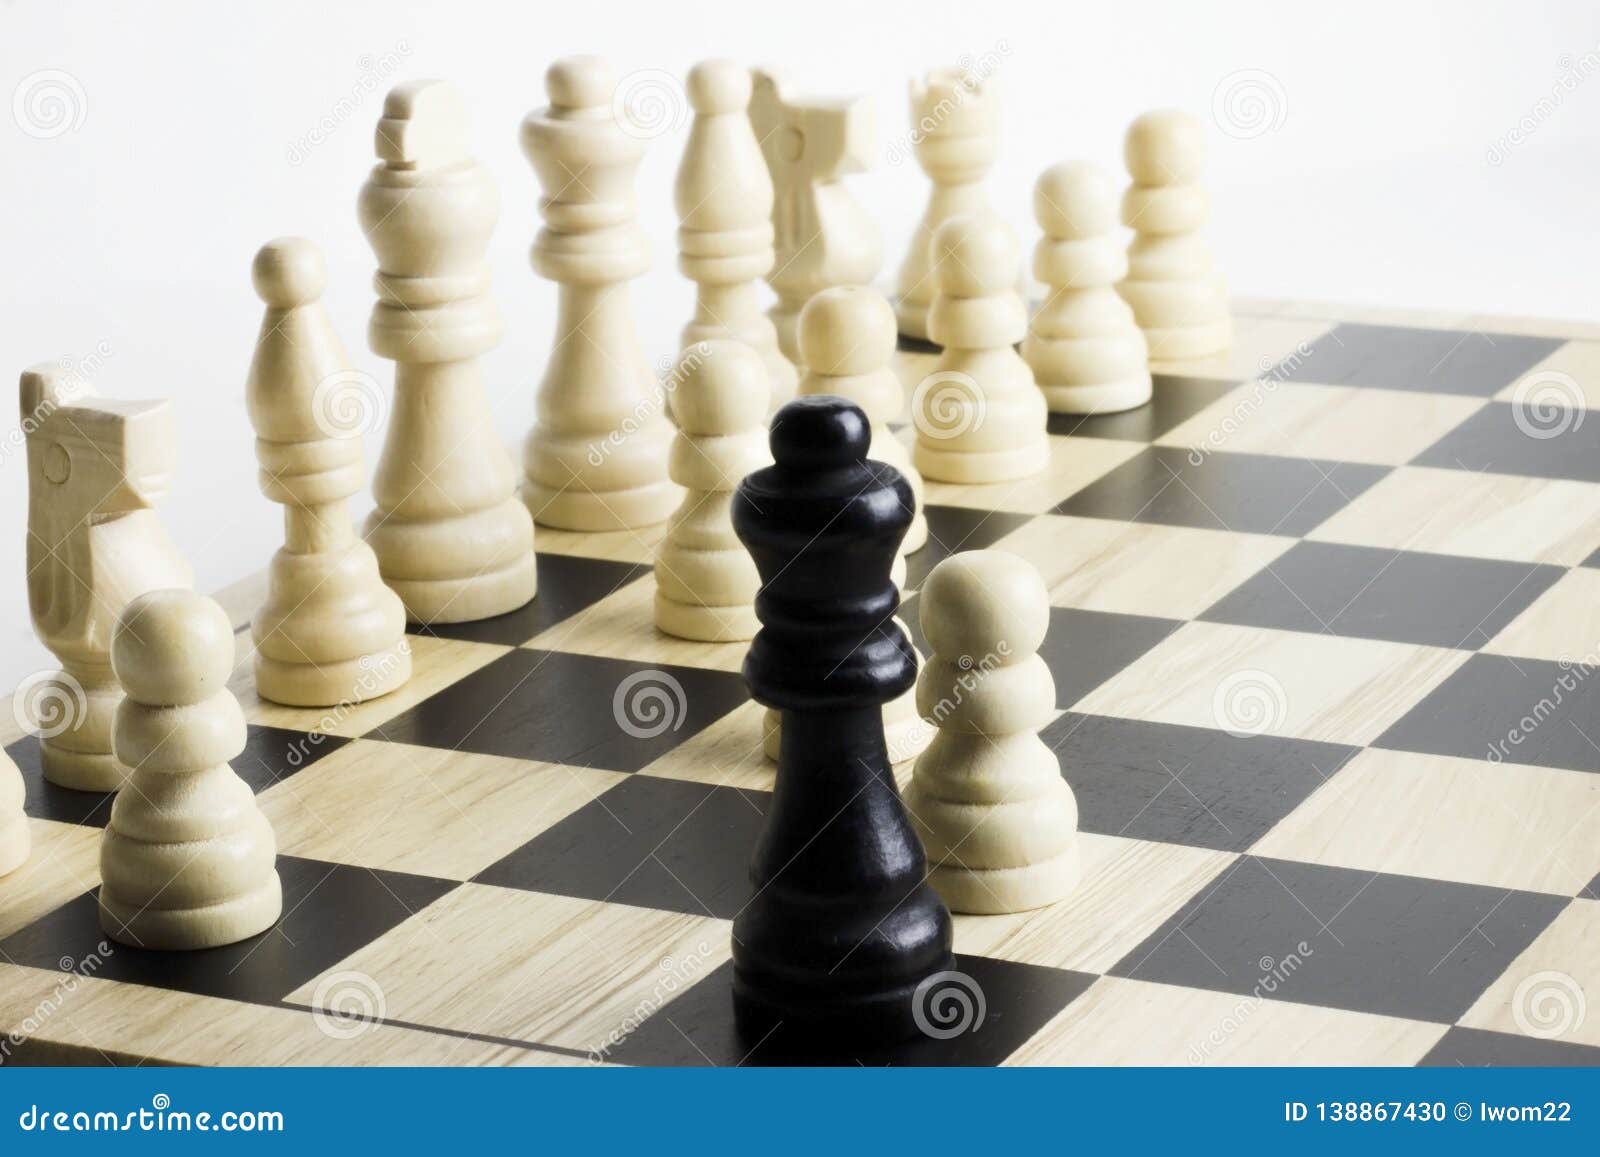 chess checkmate in four moves